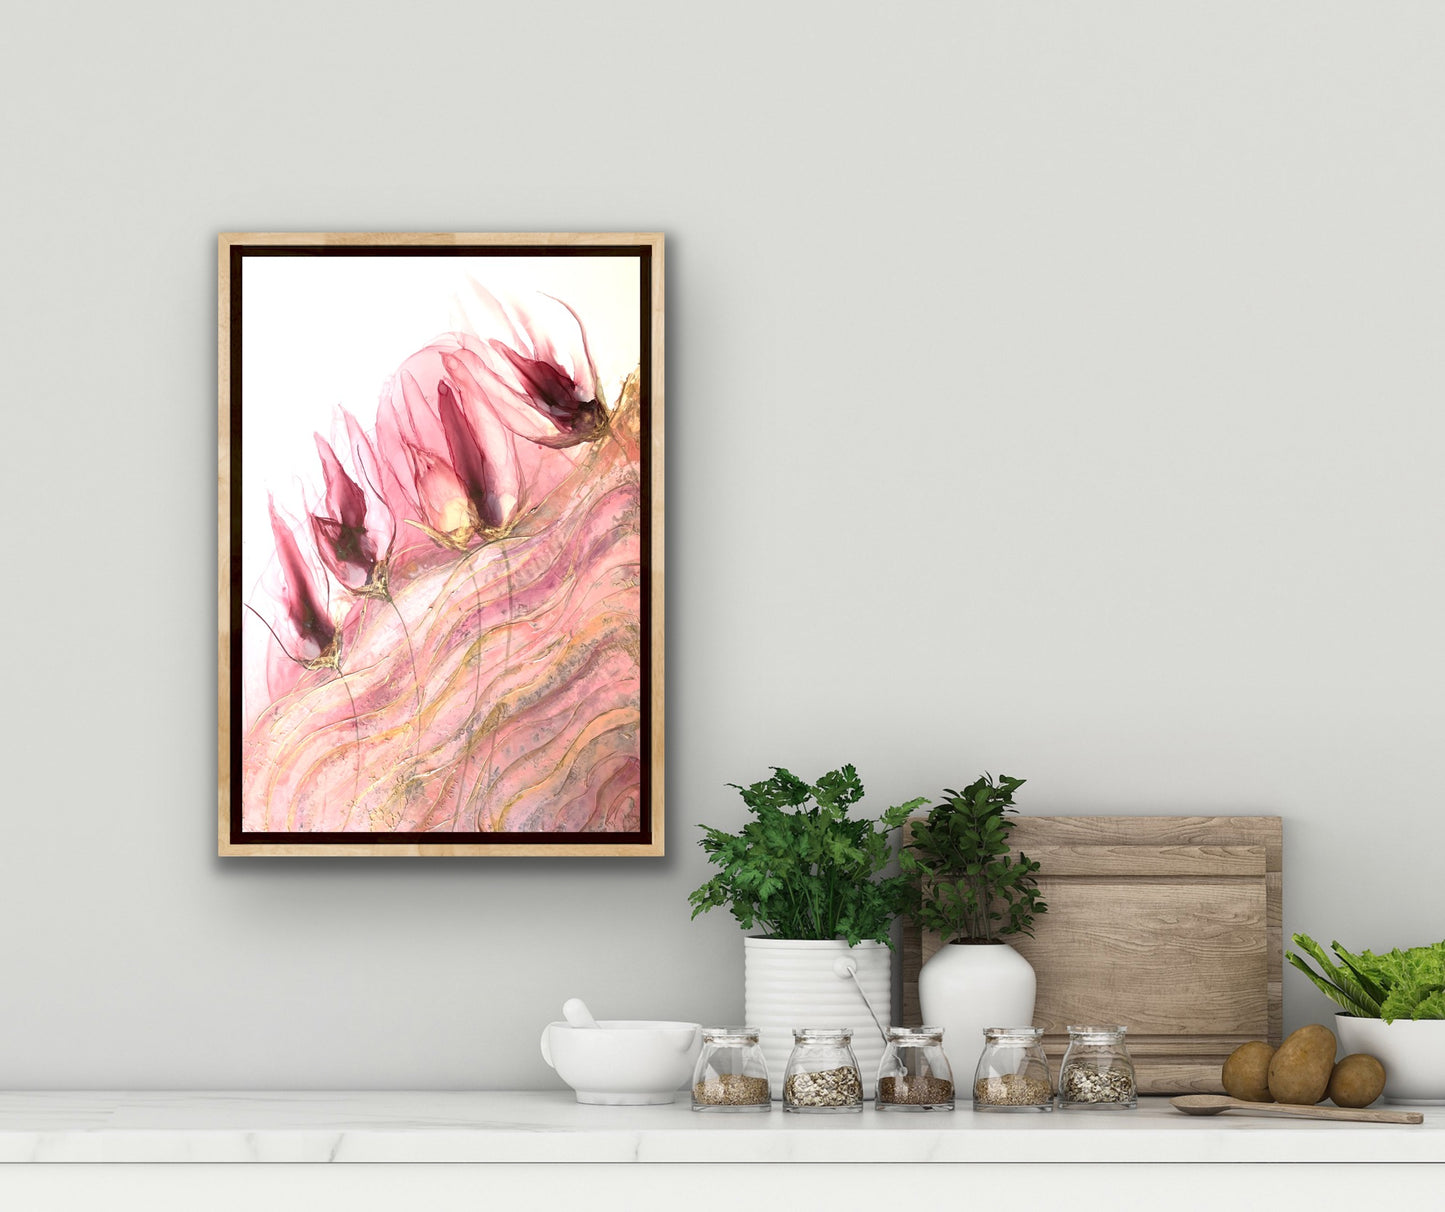 Veiled, original abstract floral art in pink and gold.